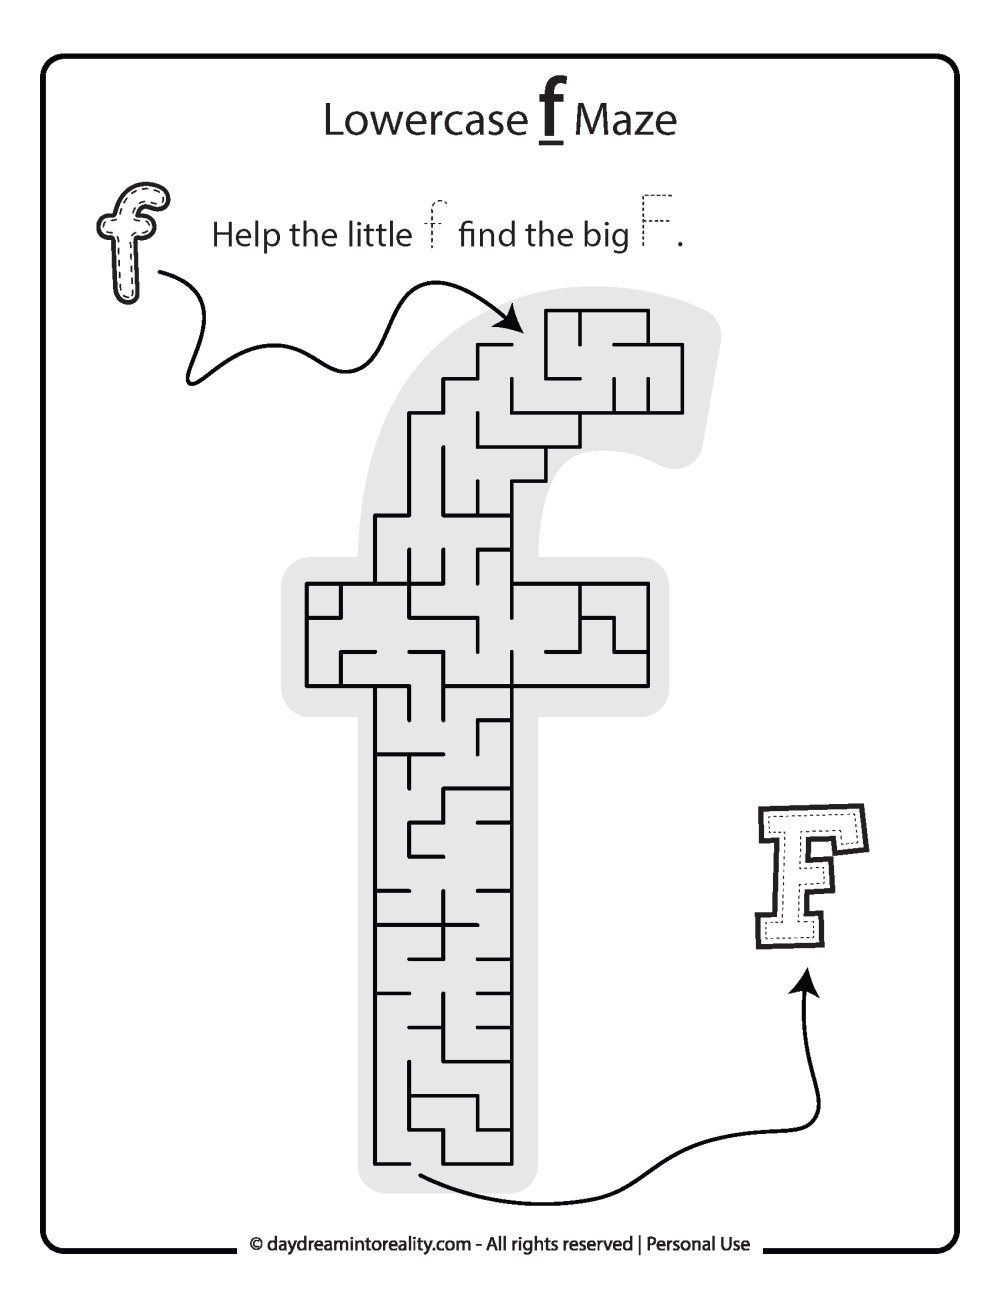 Lowercase Letter "f" Maze Free Printable